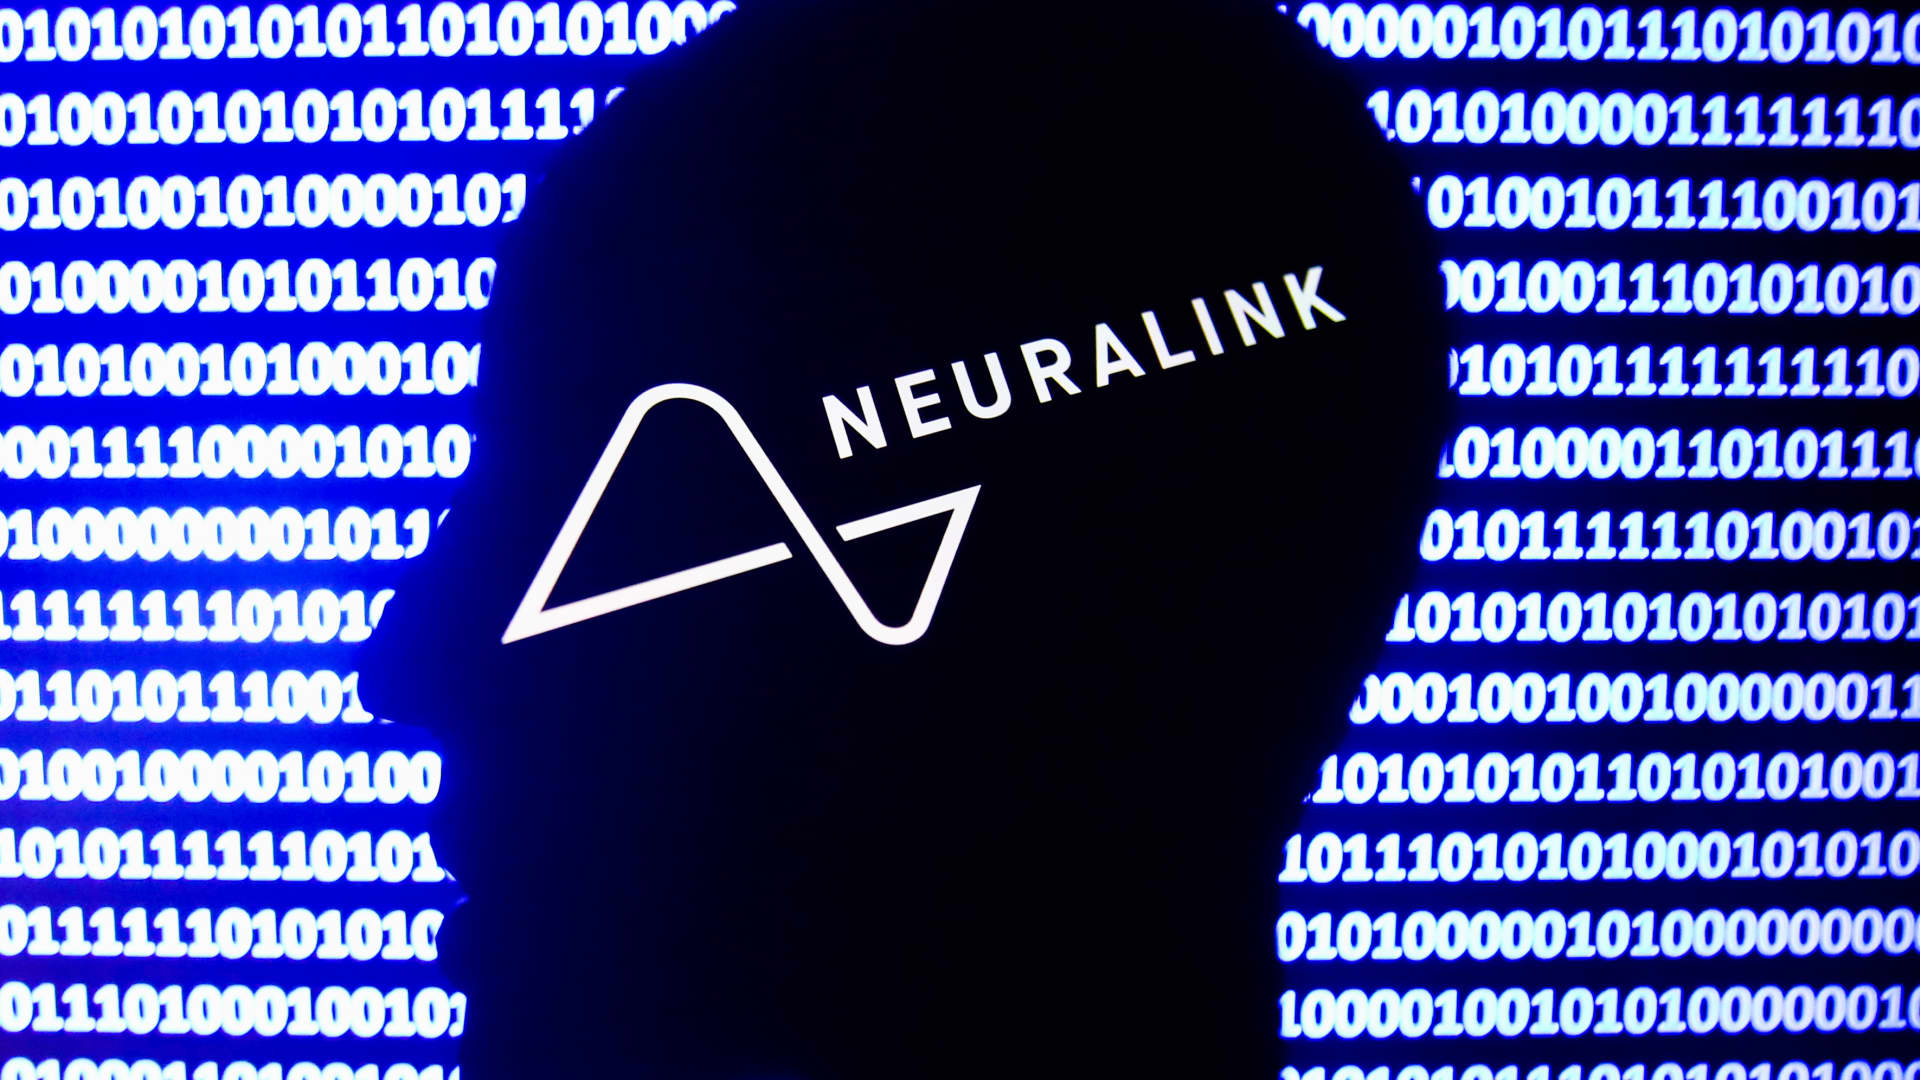 Elon Musk’s mind implant firm Neuralink declares FDA approval of in-human medical research